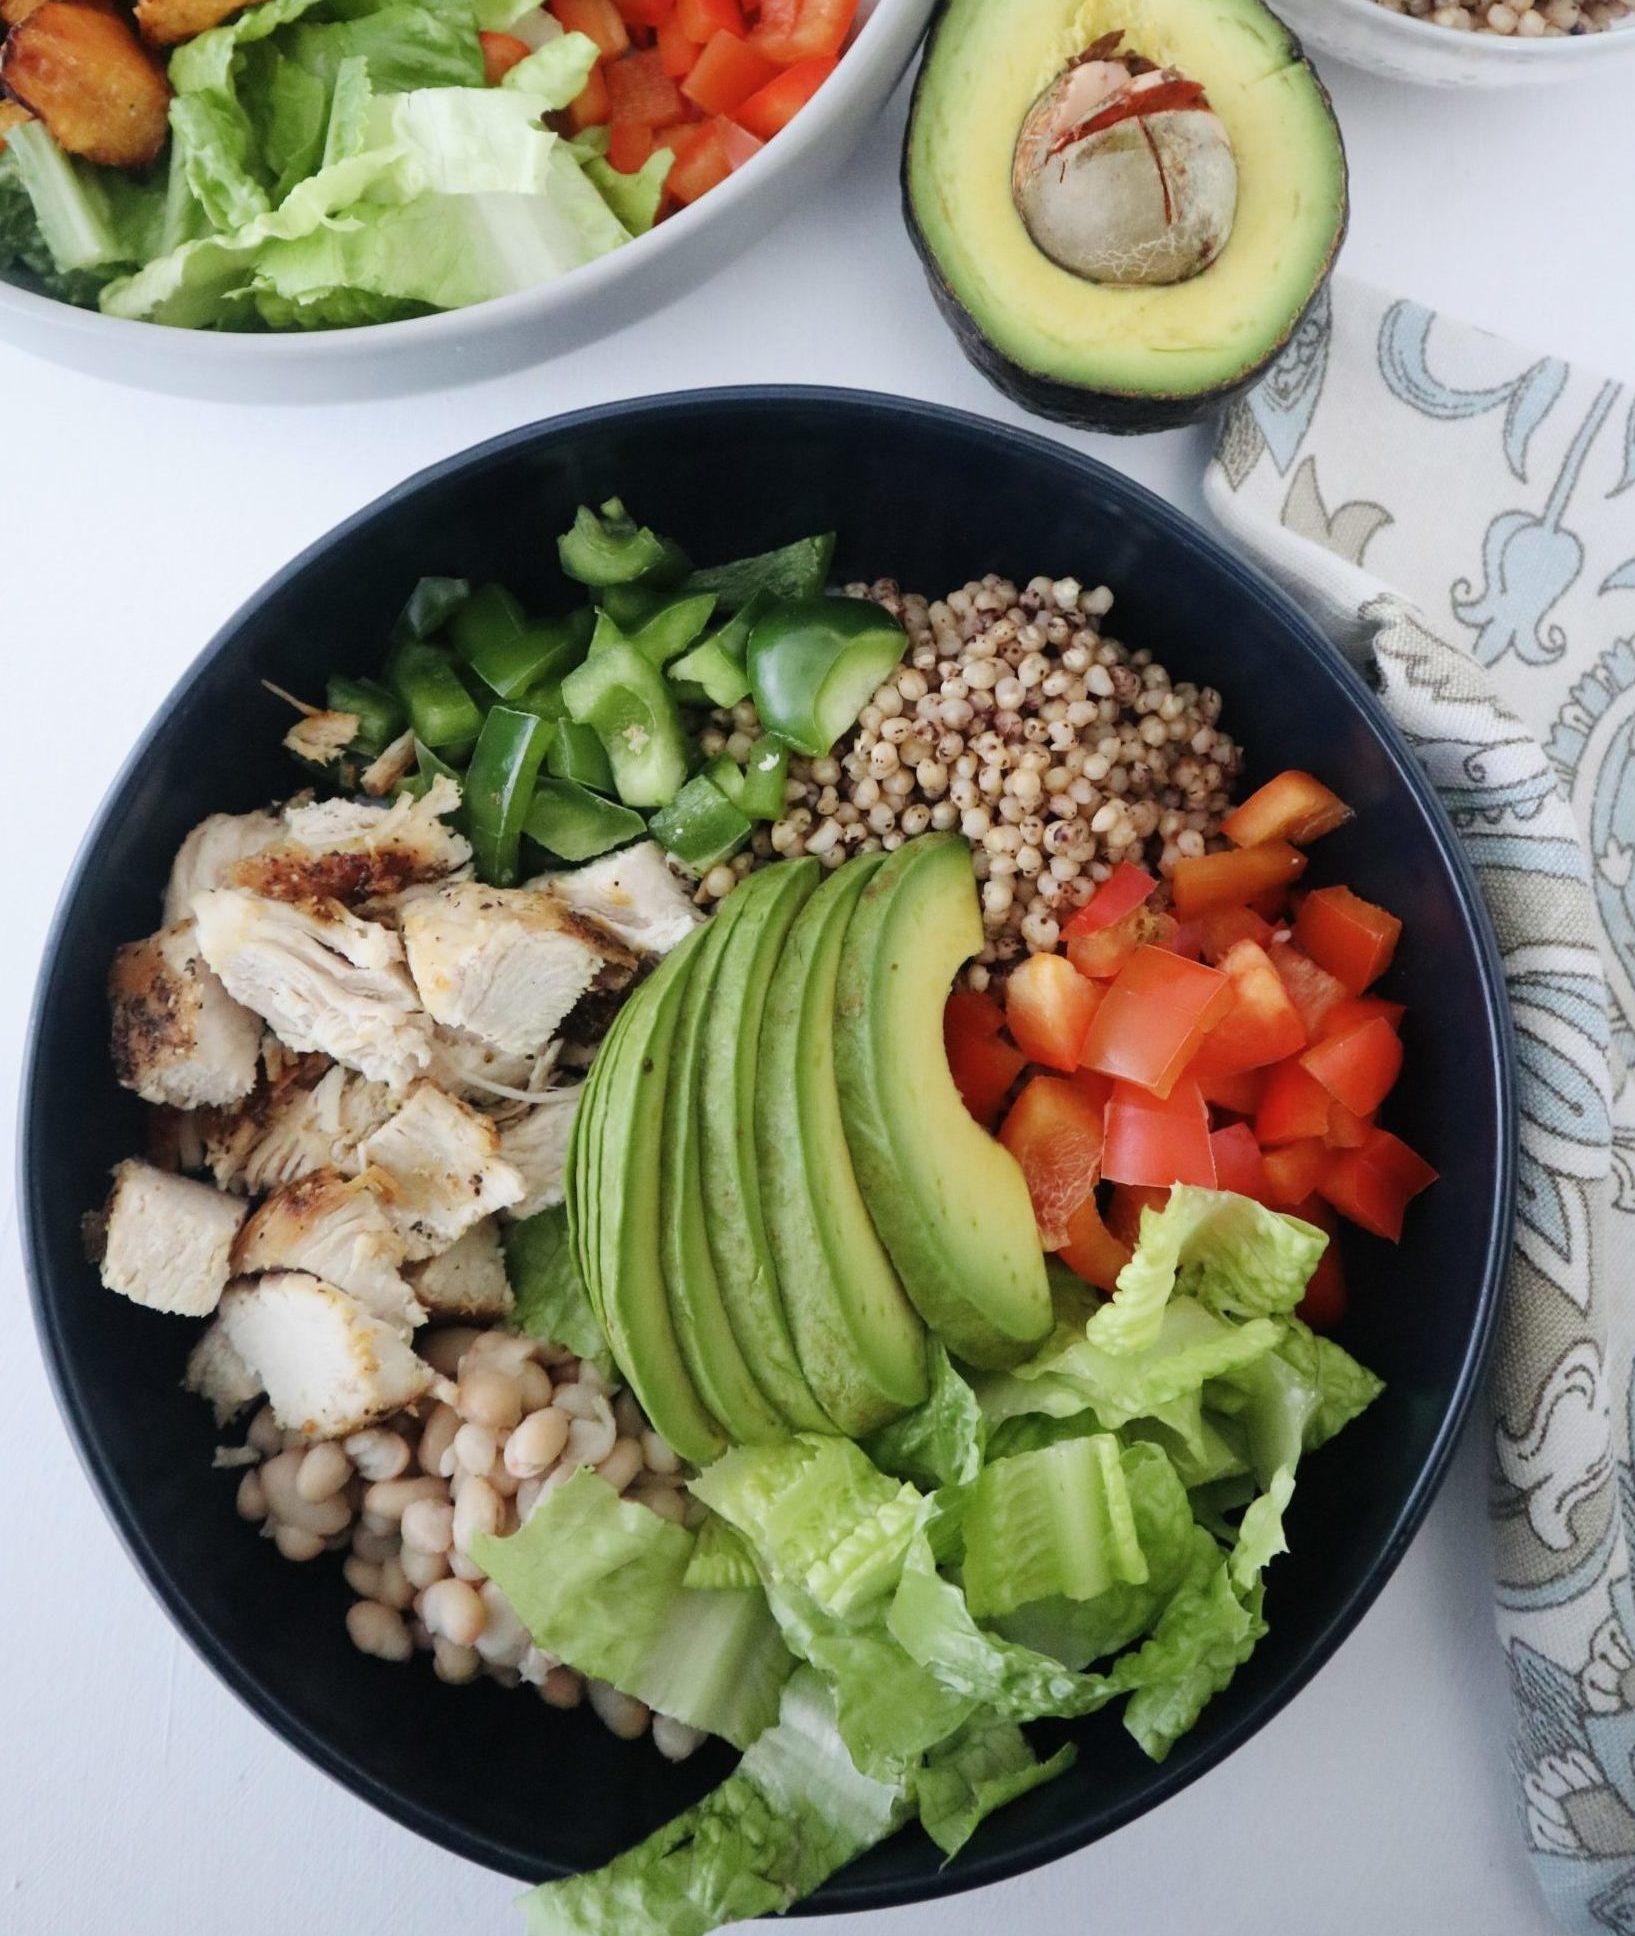 sorghum salad with chicken, avocado, peppers, lettuce